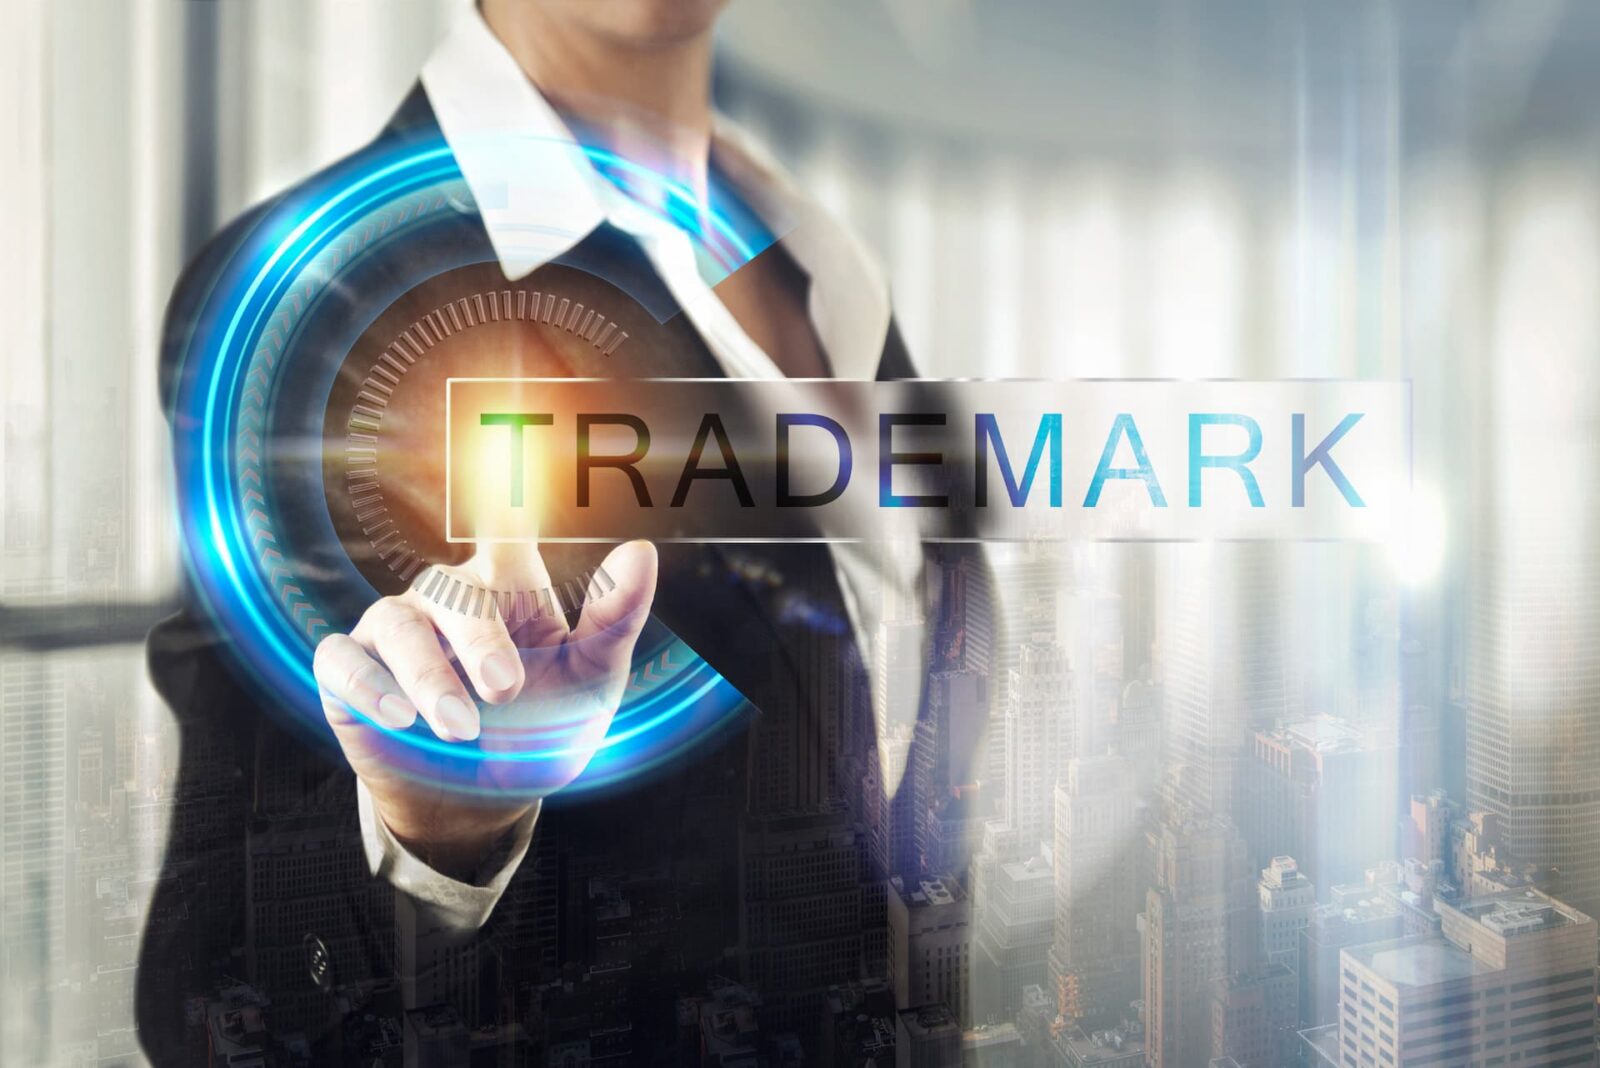 SION Patent Tax Law Firm Trademartk registration cover